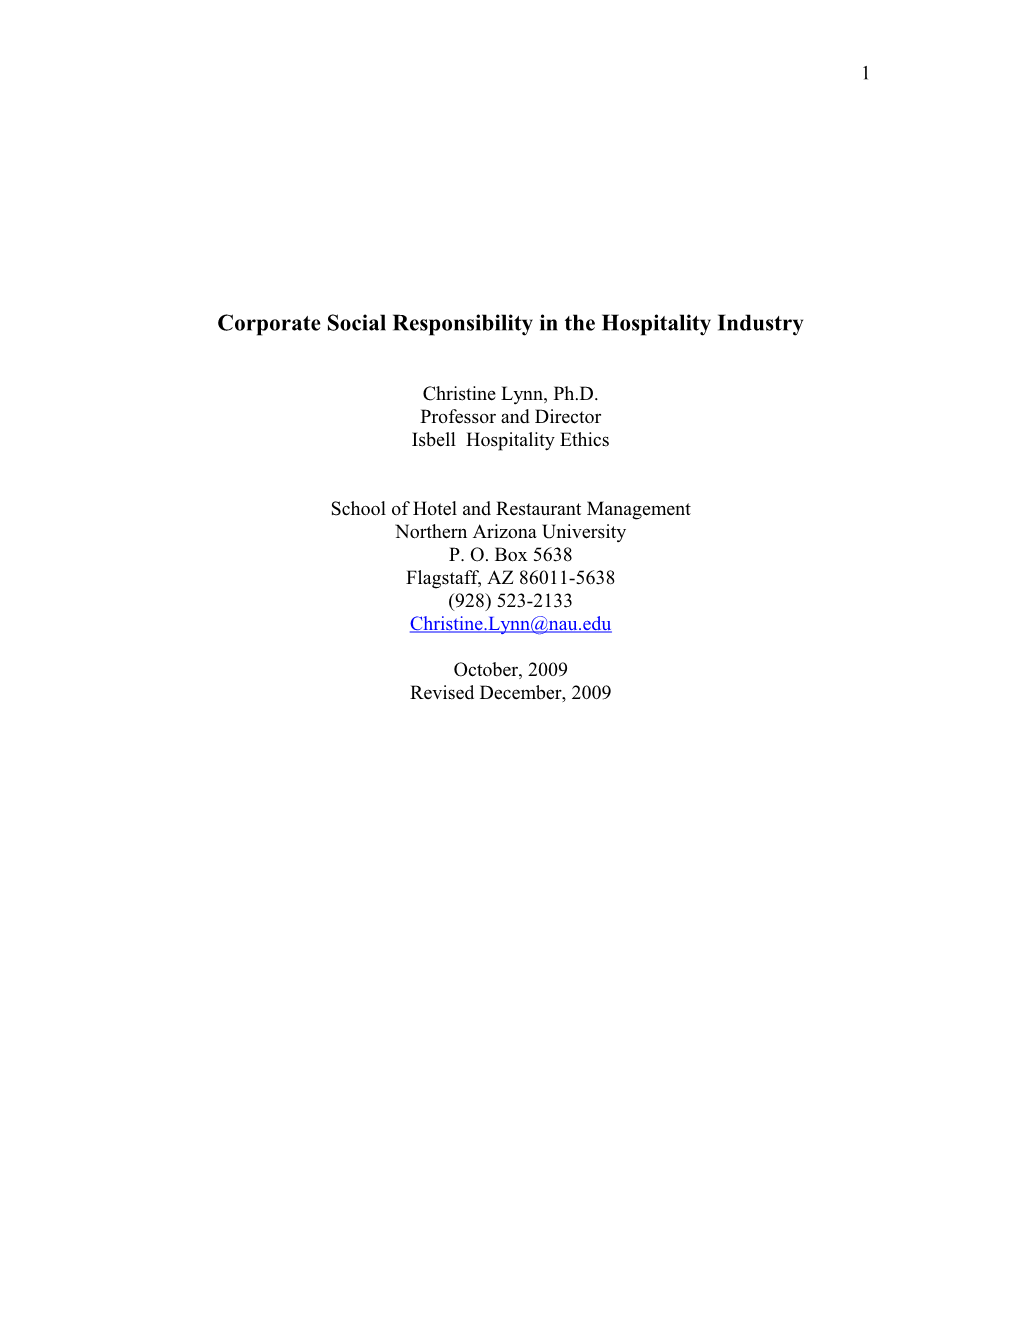 Corporate Social Responsibility in the Hospitality Industry